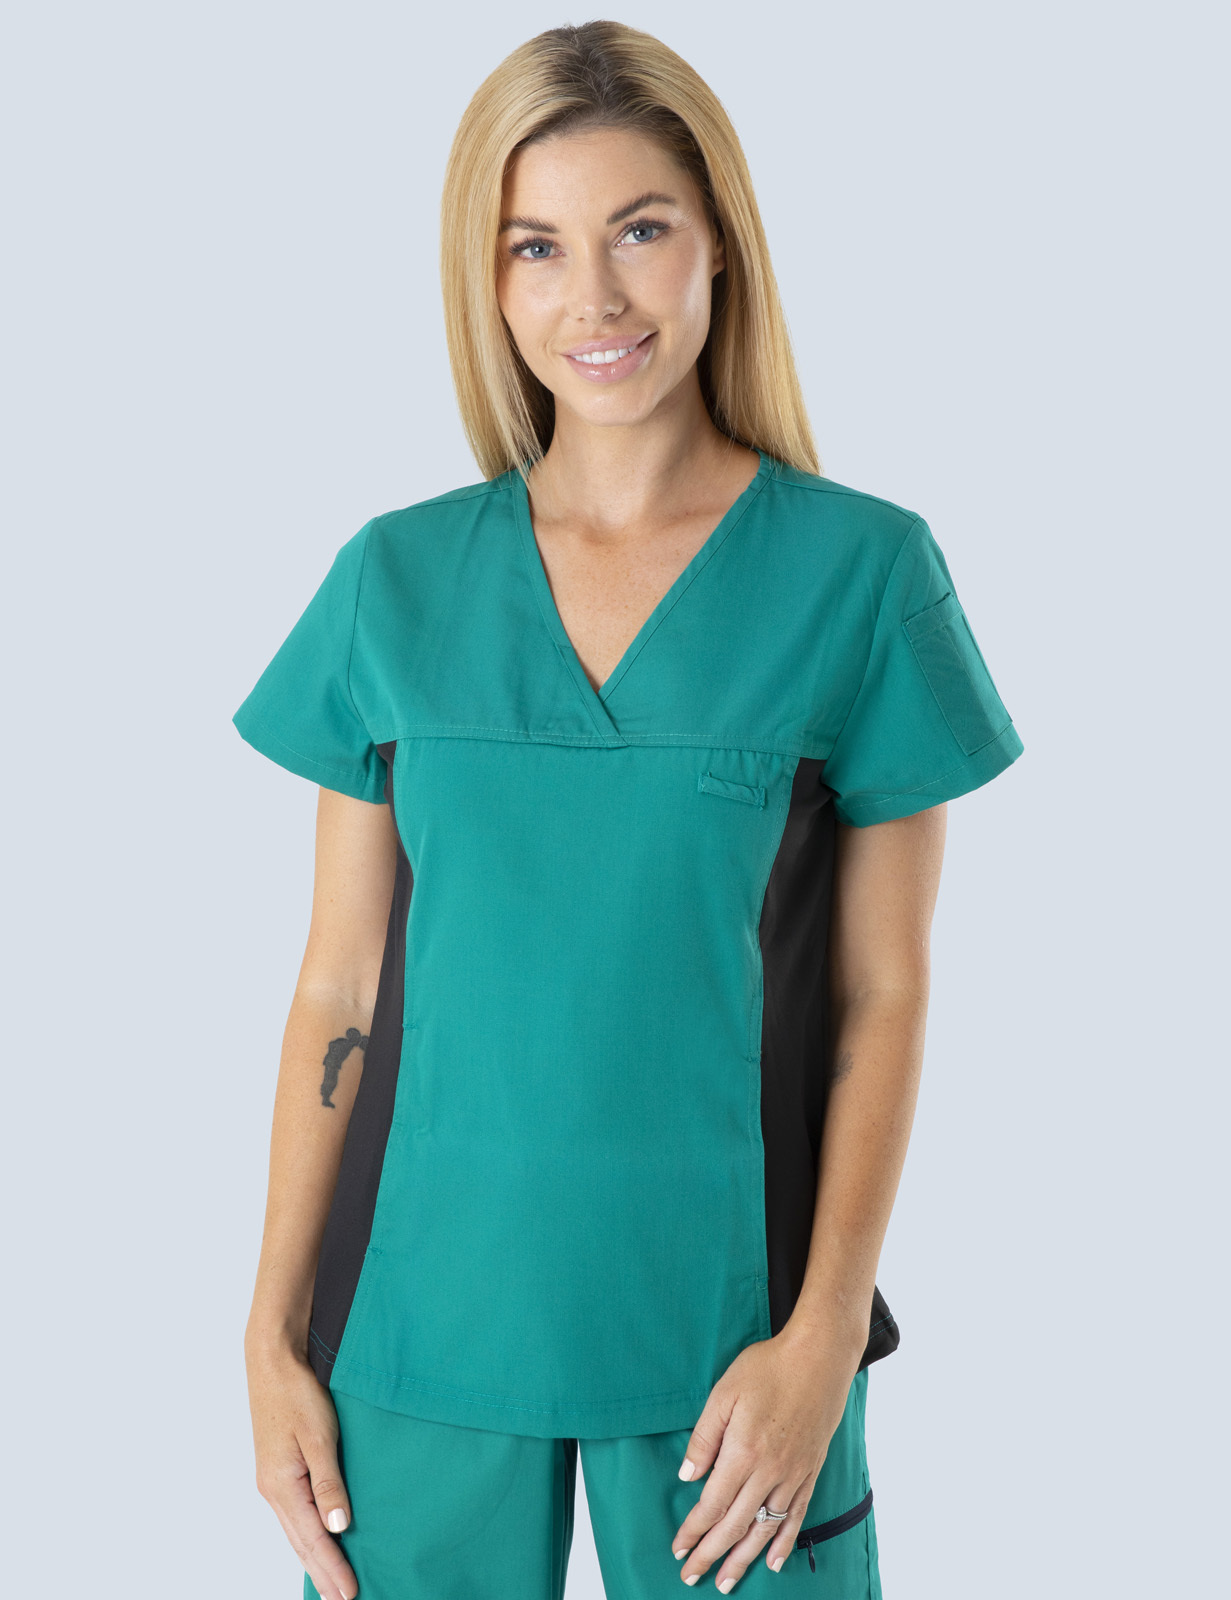 Women's Fit Solid Scrub Top With Spandex Panel - Hunter - 2X Large